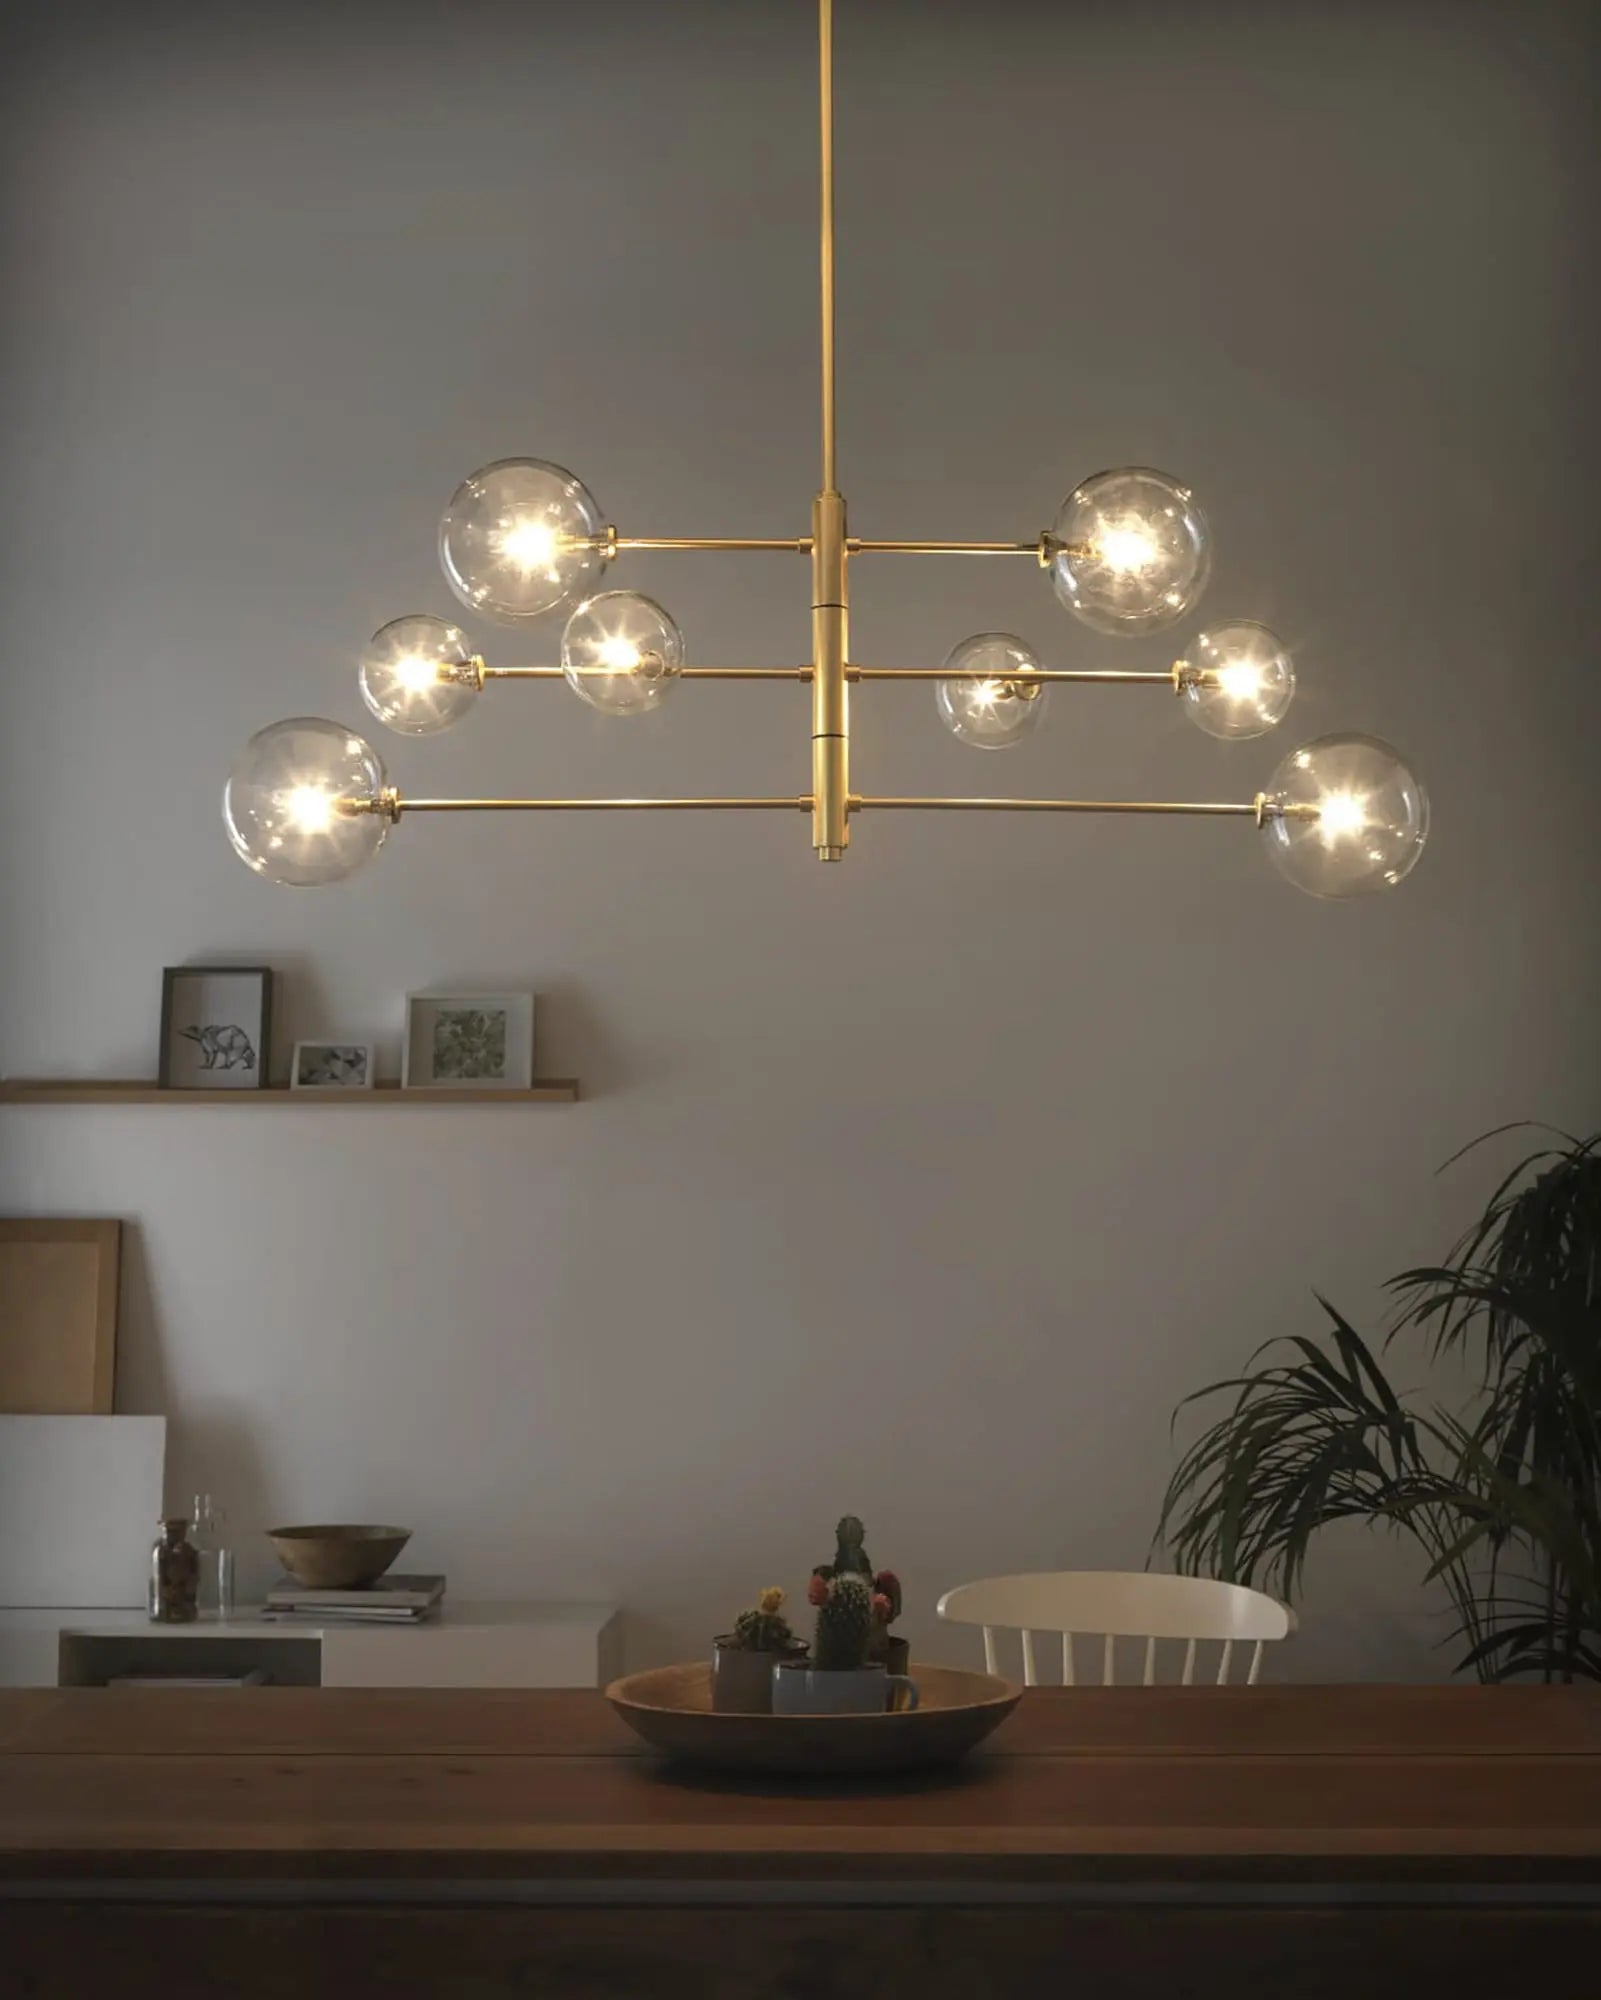 Atom contemporary adjustable pendant light in brass and clear glass orb shades above dining table